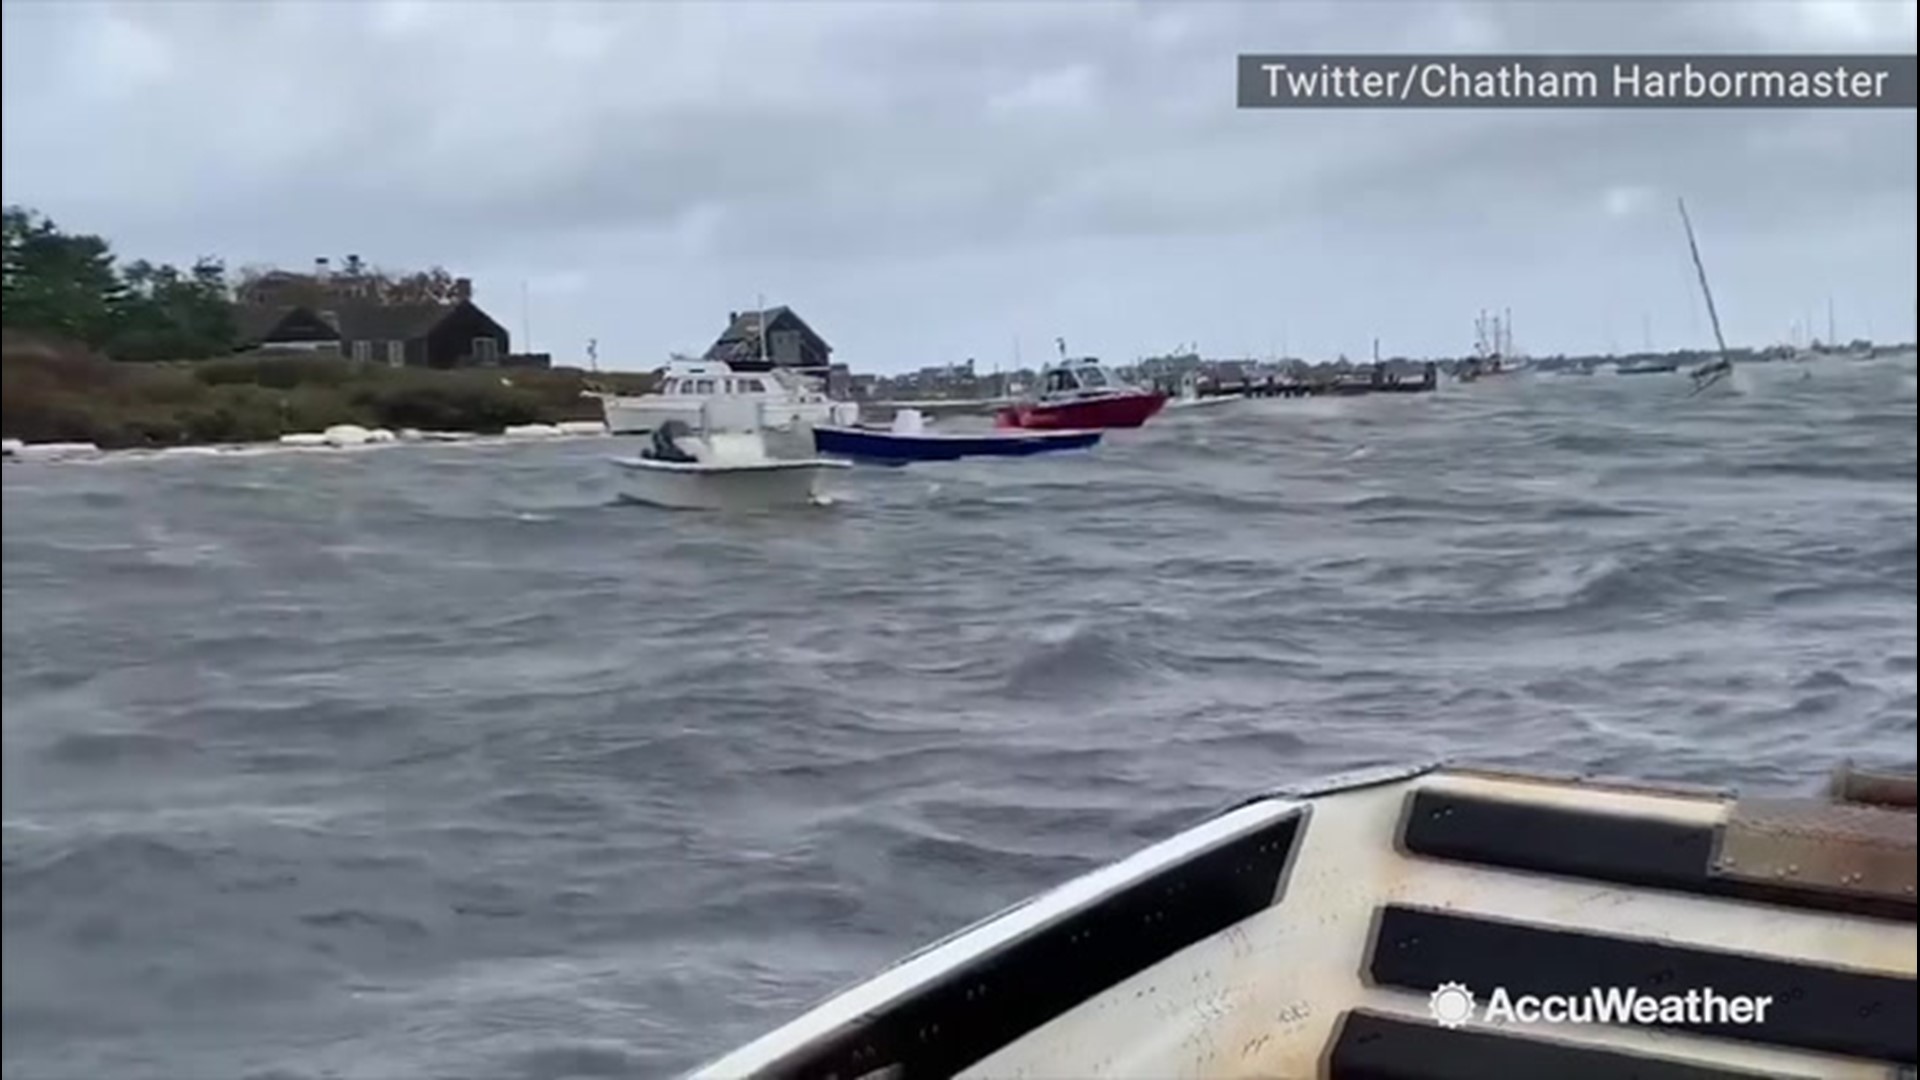 Rough waters pounded boats in Stage Harbor near Chatham, Massachusetts, Thursday as fierce winds from a bomb cyclone lashed the region.